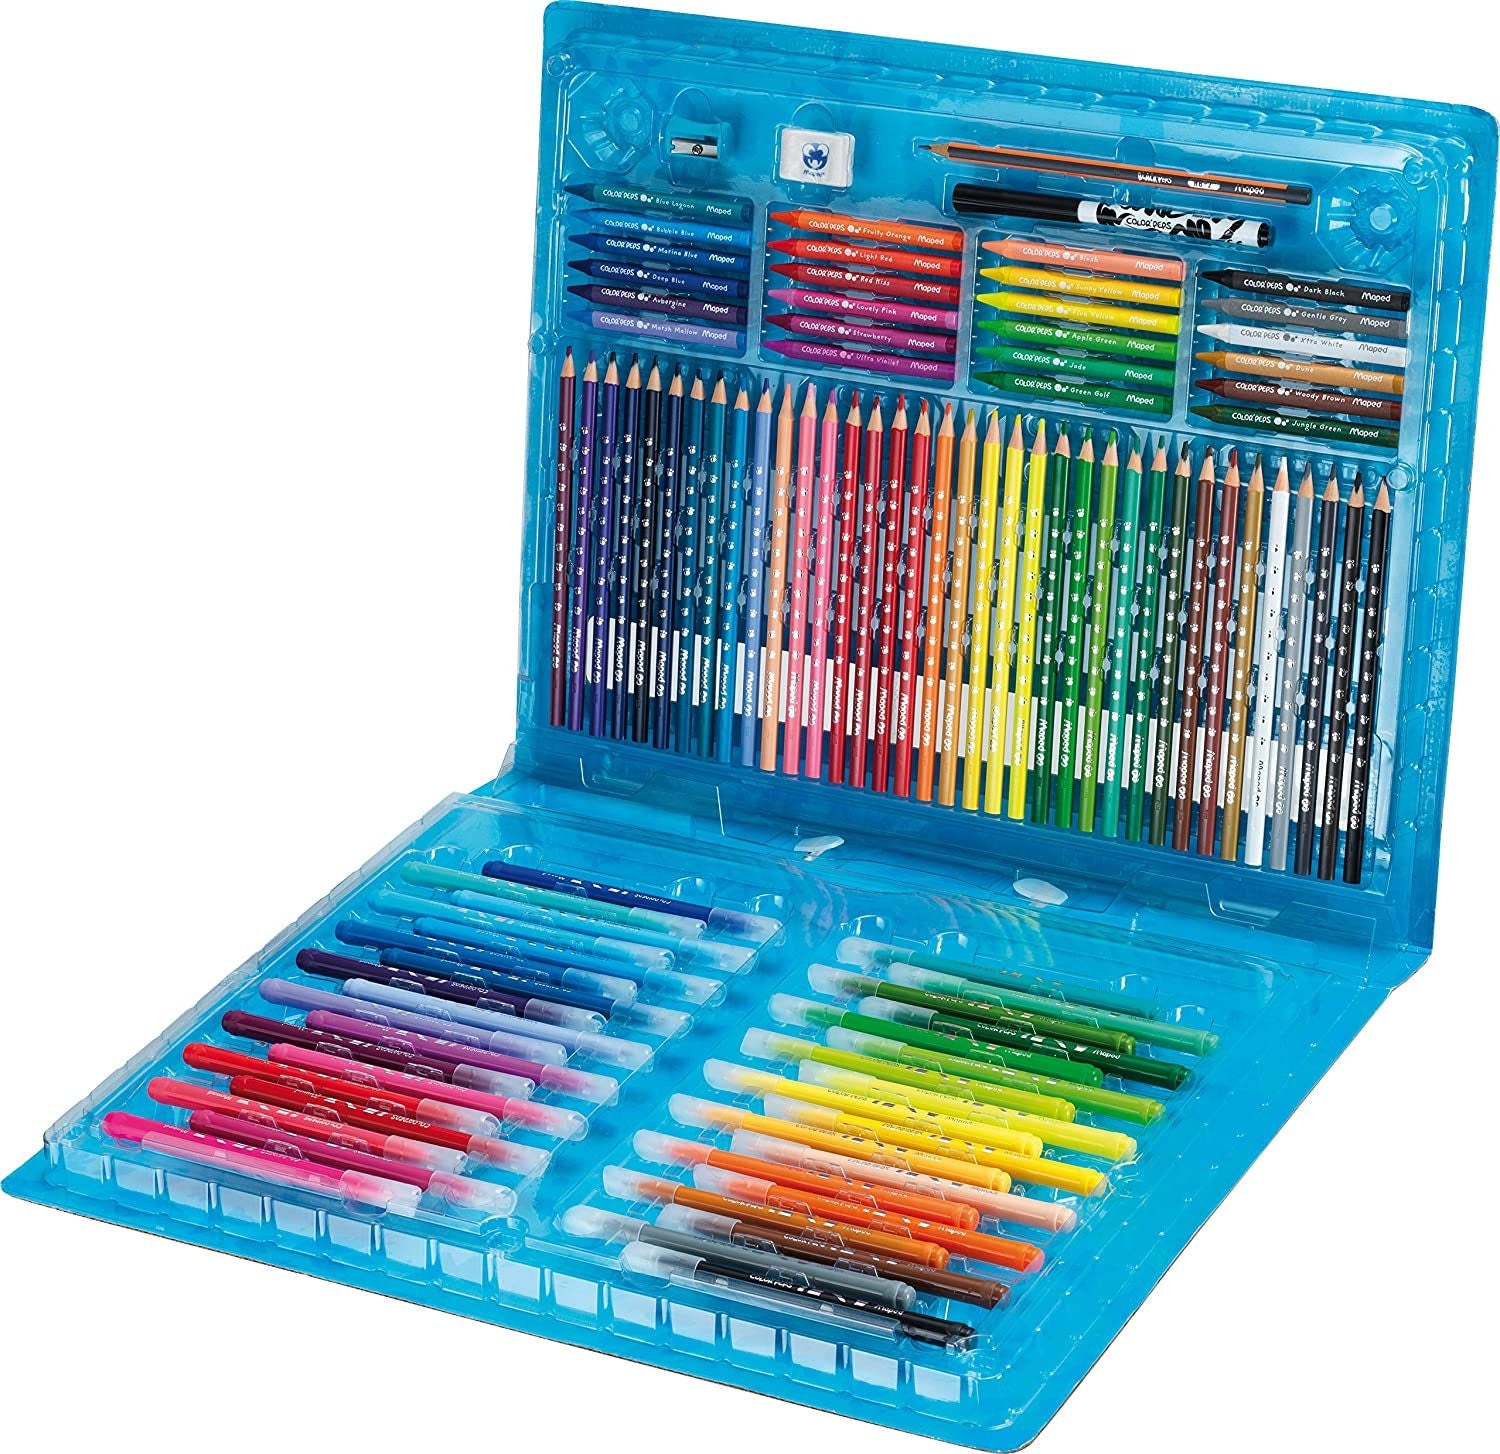 Maped Color'Peps Duo Colouring Pencils - 24 colours (Pack of 12) – ATALONDON